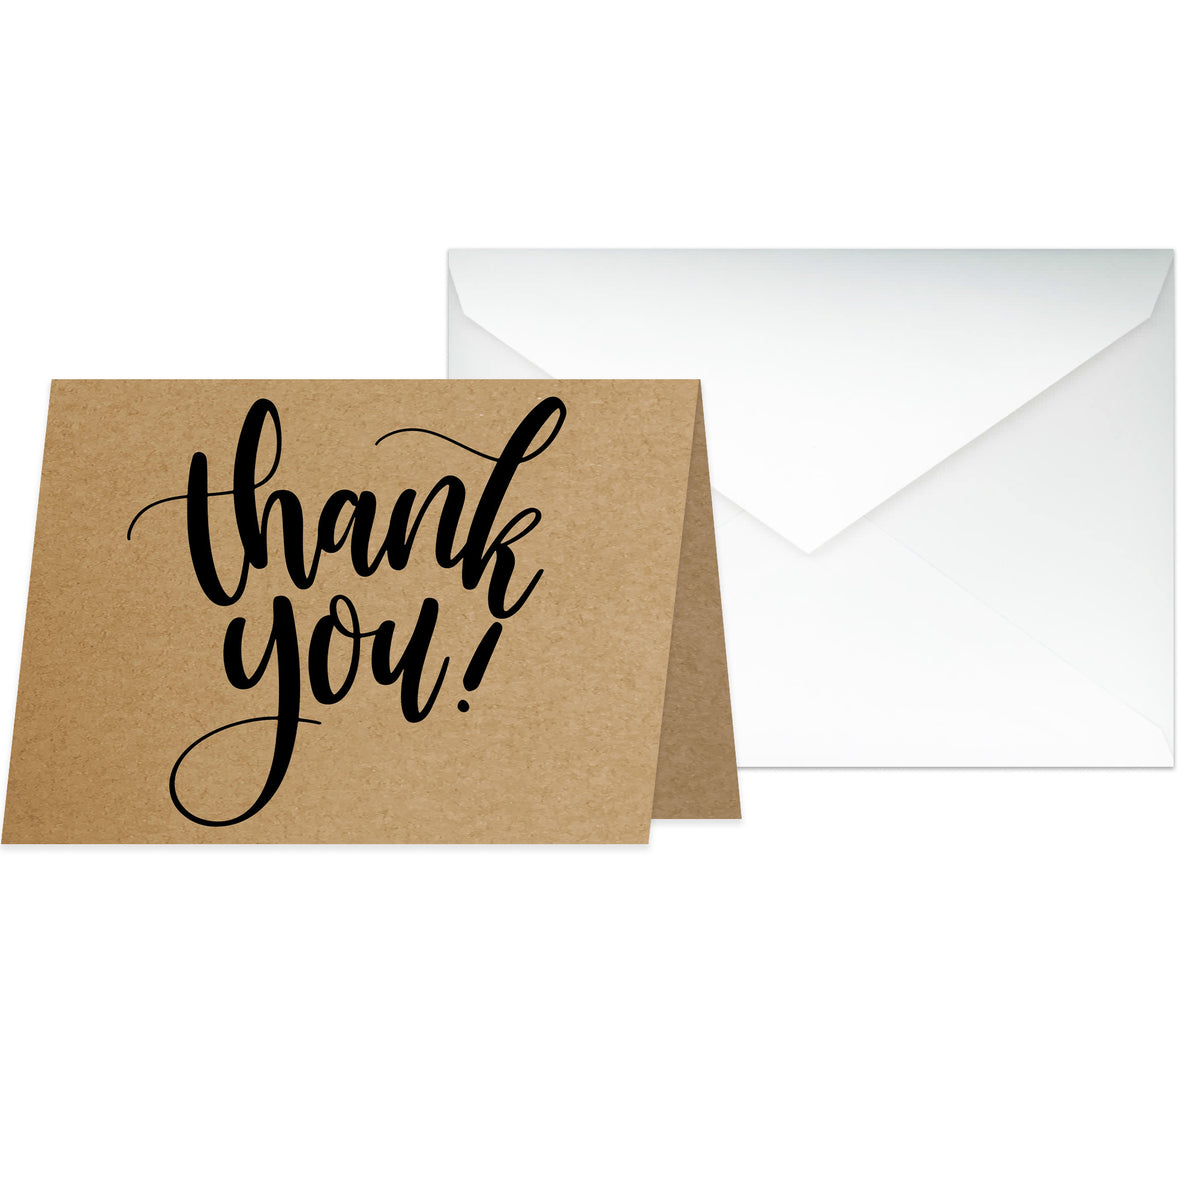 Pre-Printed KRAFT Folded A1 Thank you Cards and Envelopes - 50 pack